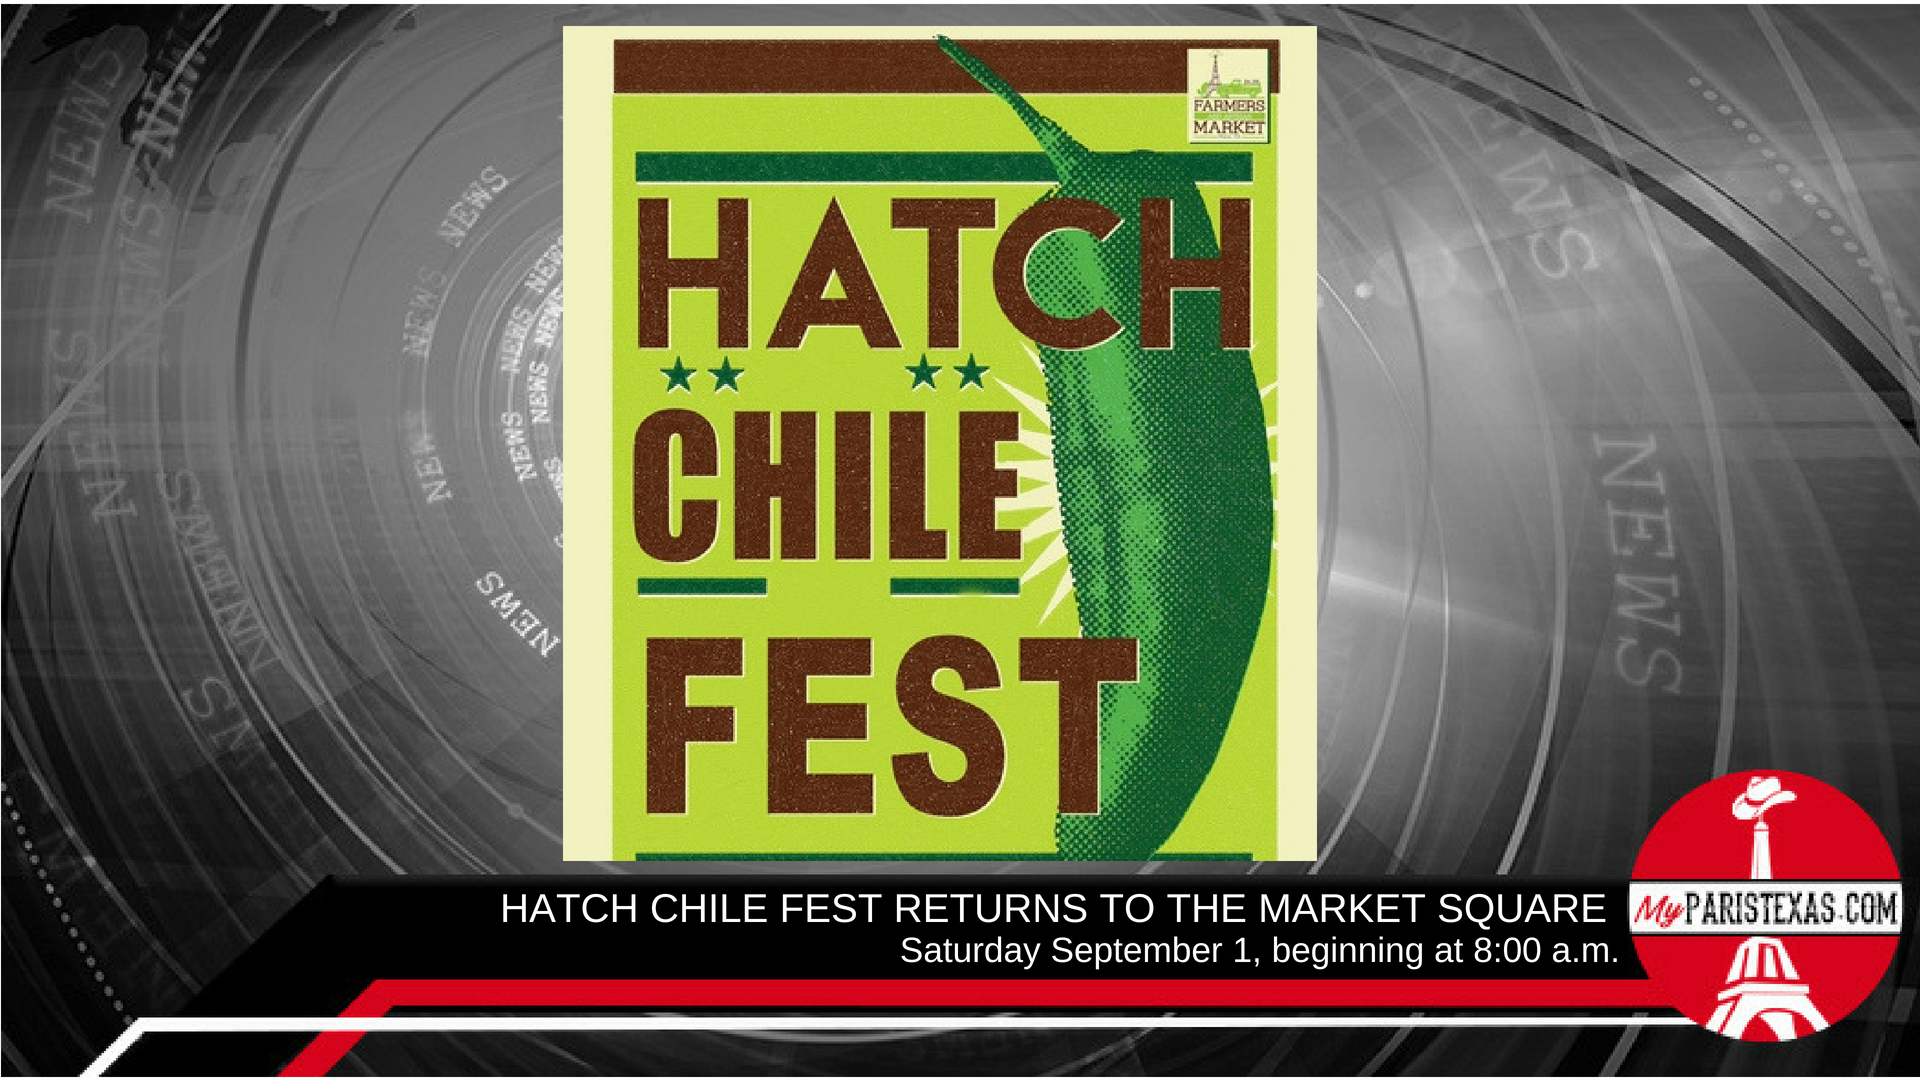 Hatch Chile Fest returns to the Market Square LOCAL EVENTS